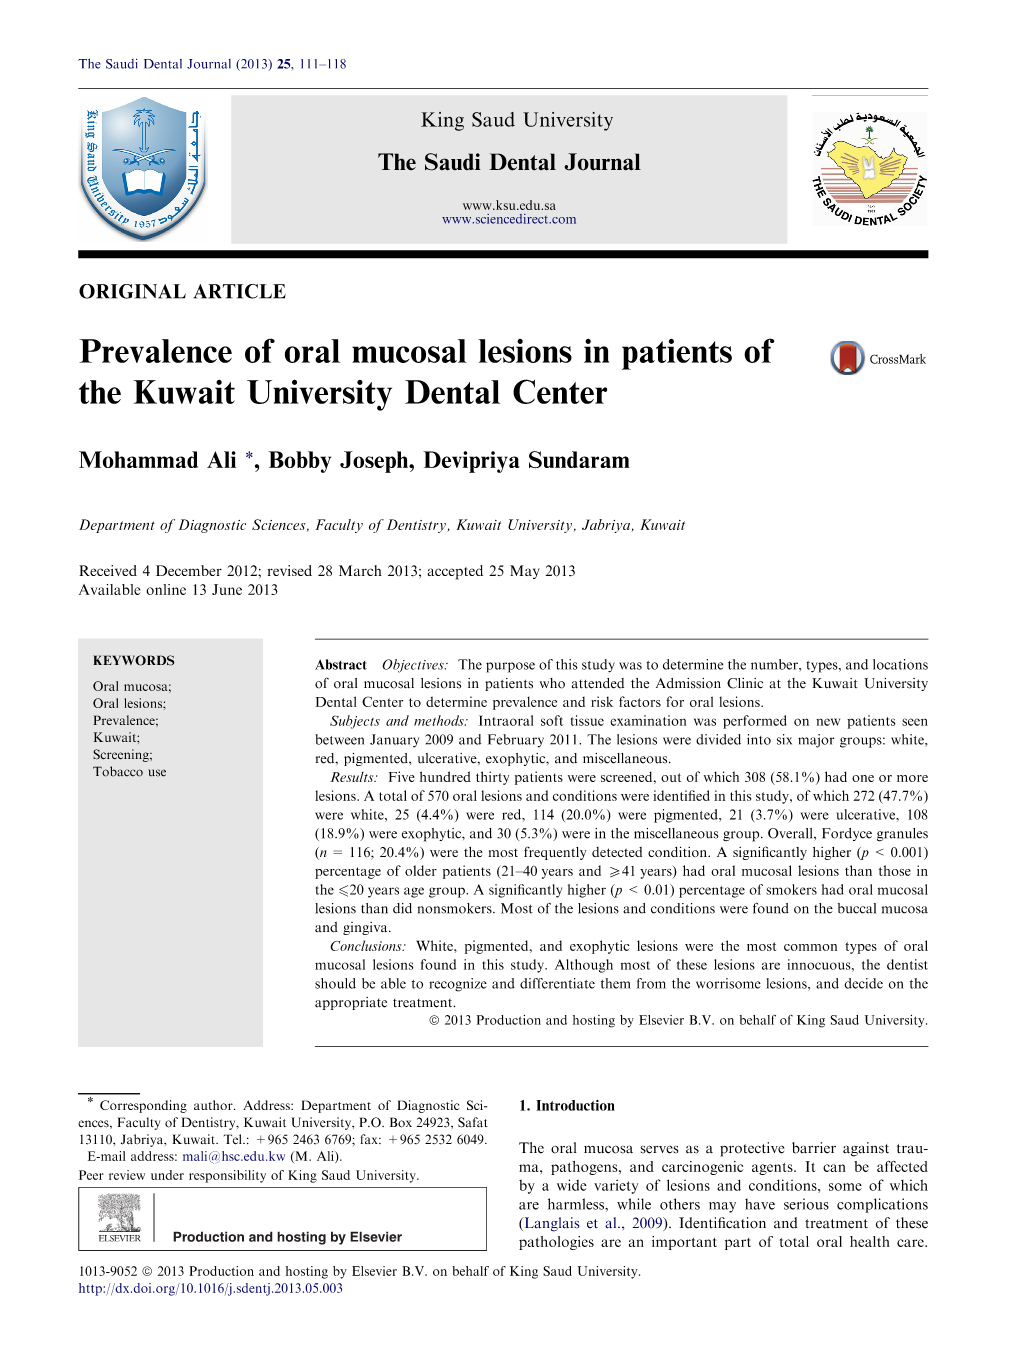 Prevalence of Oral Mucosal Lesions in Patients of the Kuwait University Dental Center